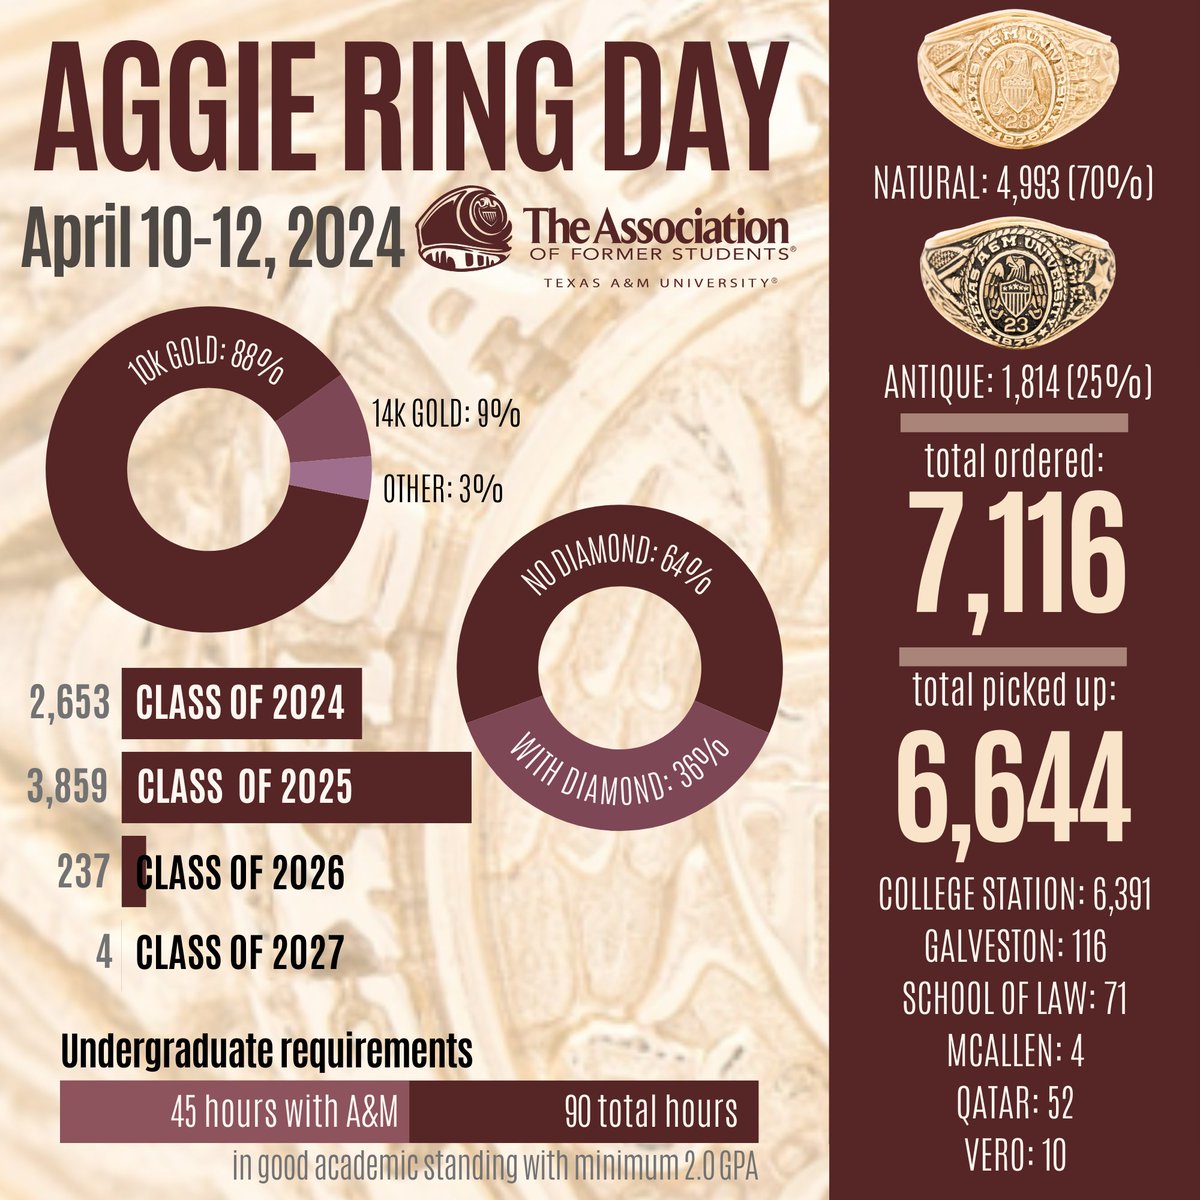 Aggie Ring Day is THIS WEEK! We're so proud of the over 7,000 Aggies who ordered their Ring this spring! Do you prefer antique or natural? Diamond or no diamond? Let us know down below! 👍